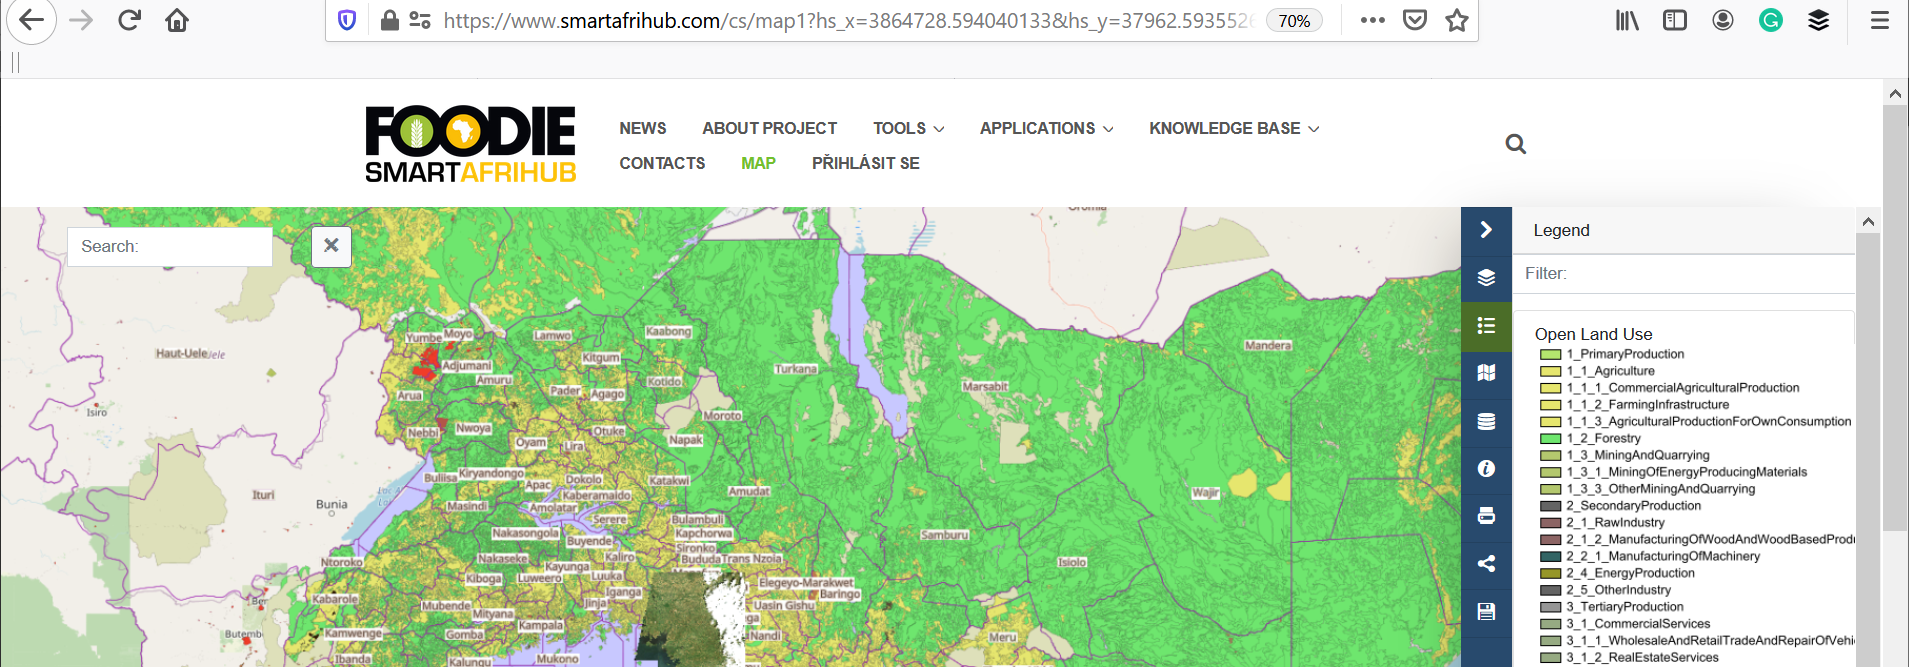 Maps on SmartAfriHub - Tools for a new way of Citizens Science